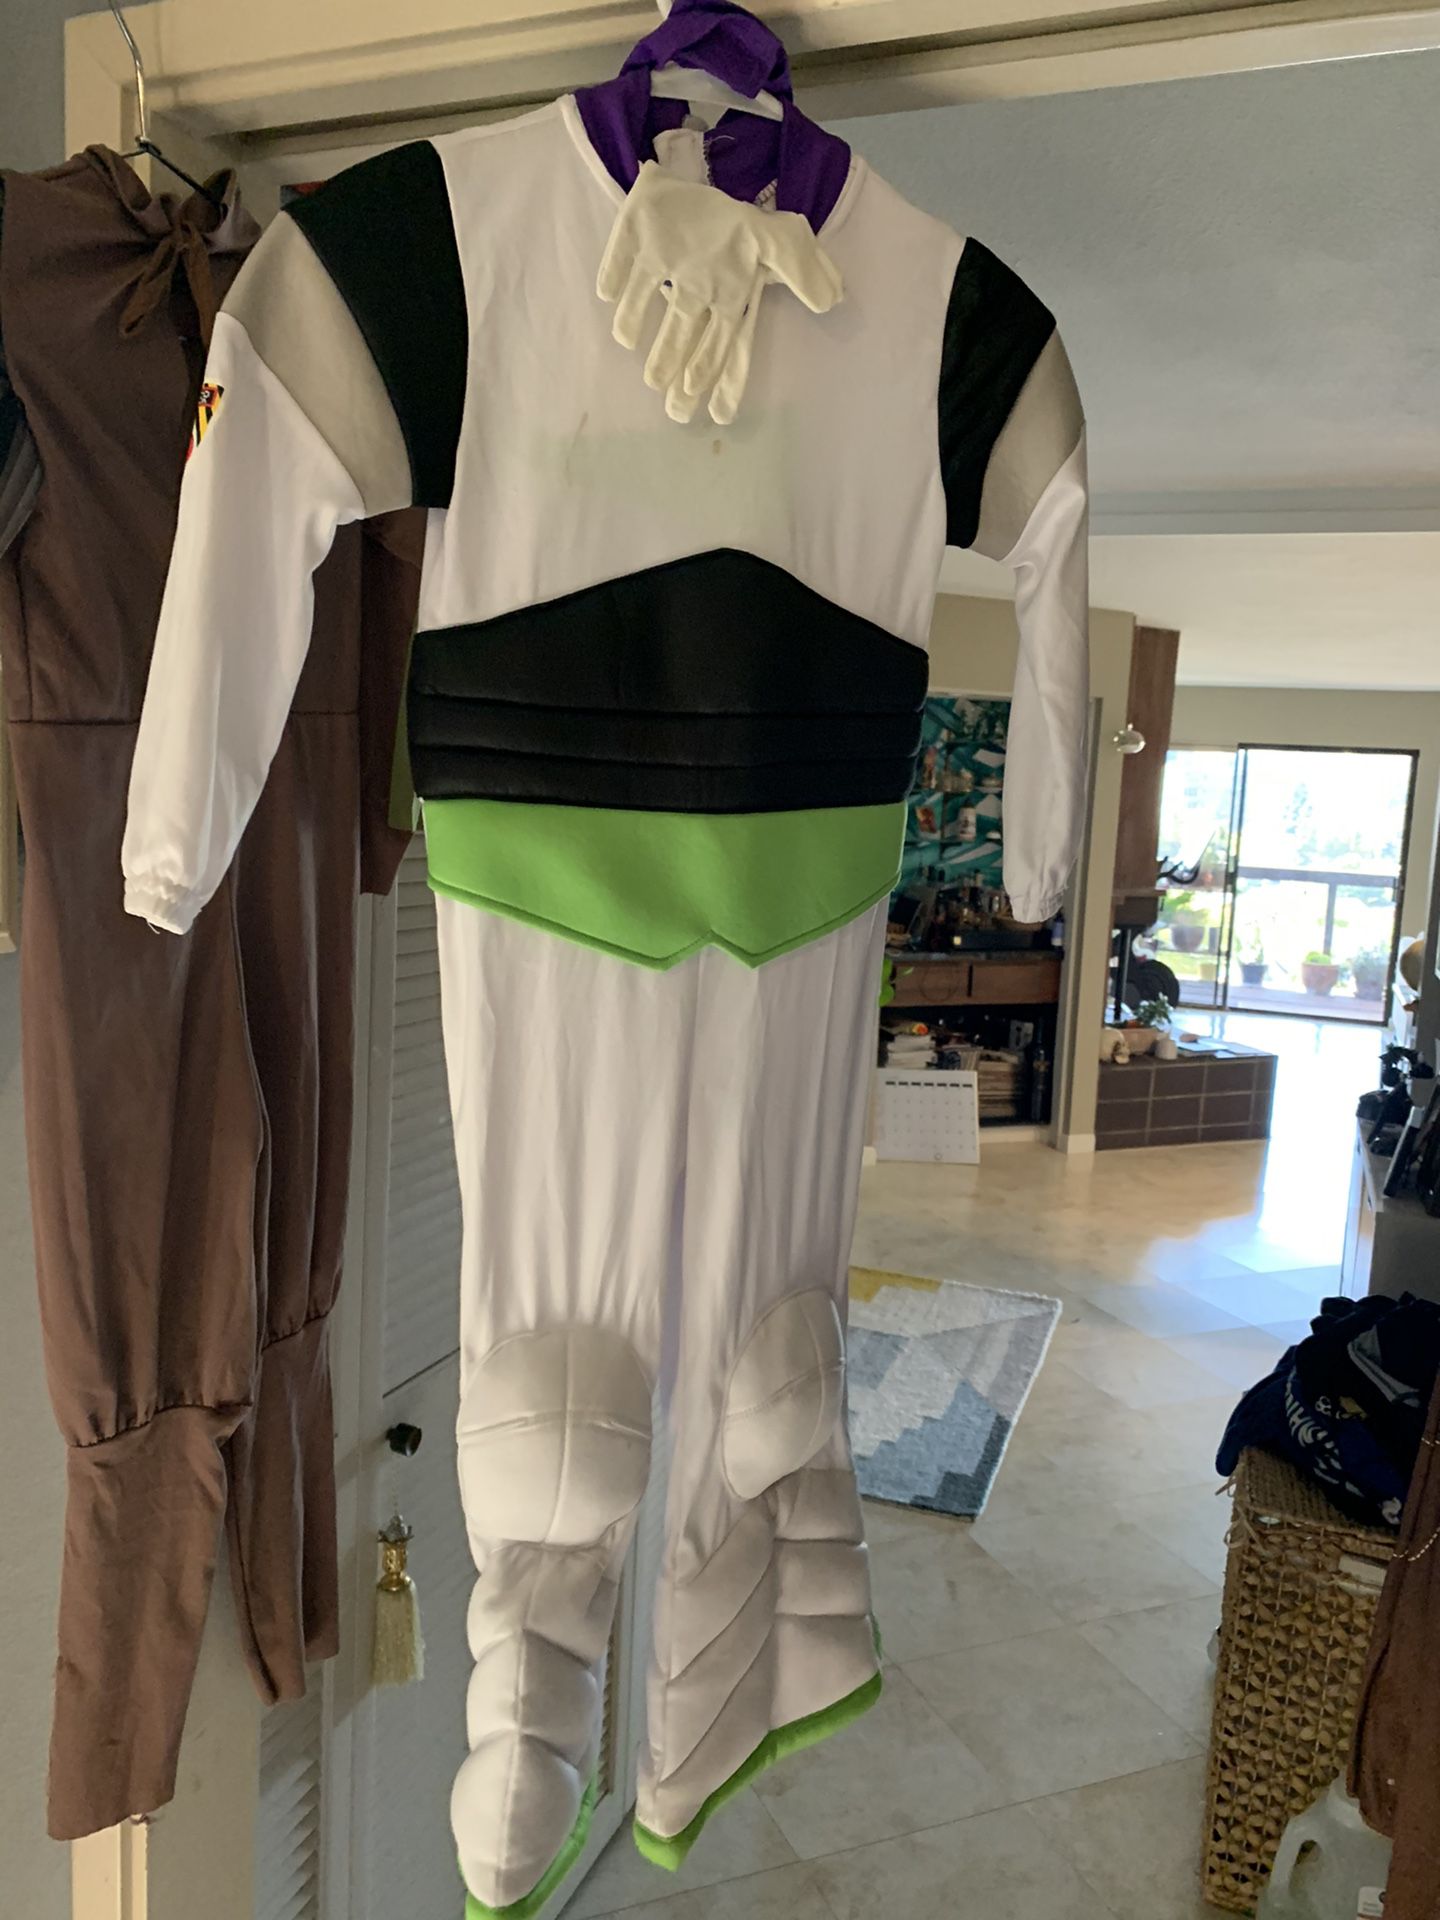 The Disney store buzz light-year costume size small Size 4